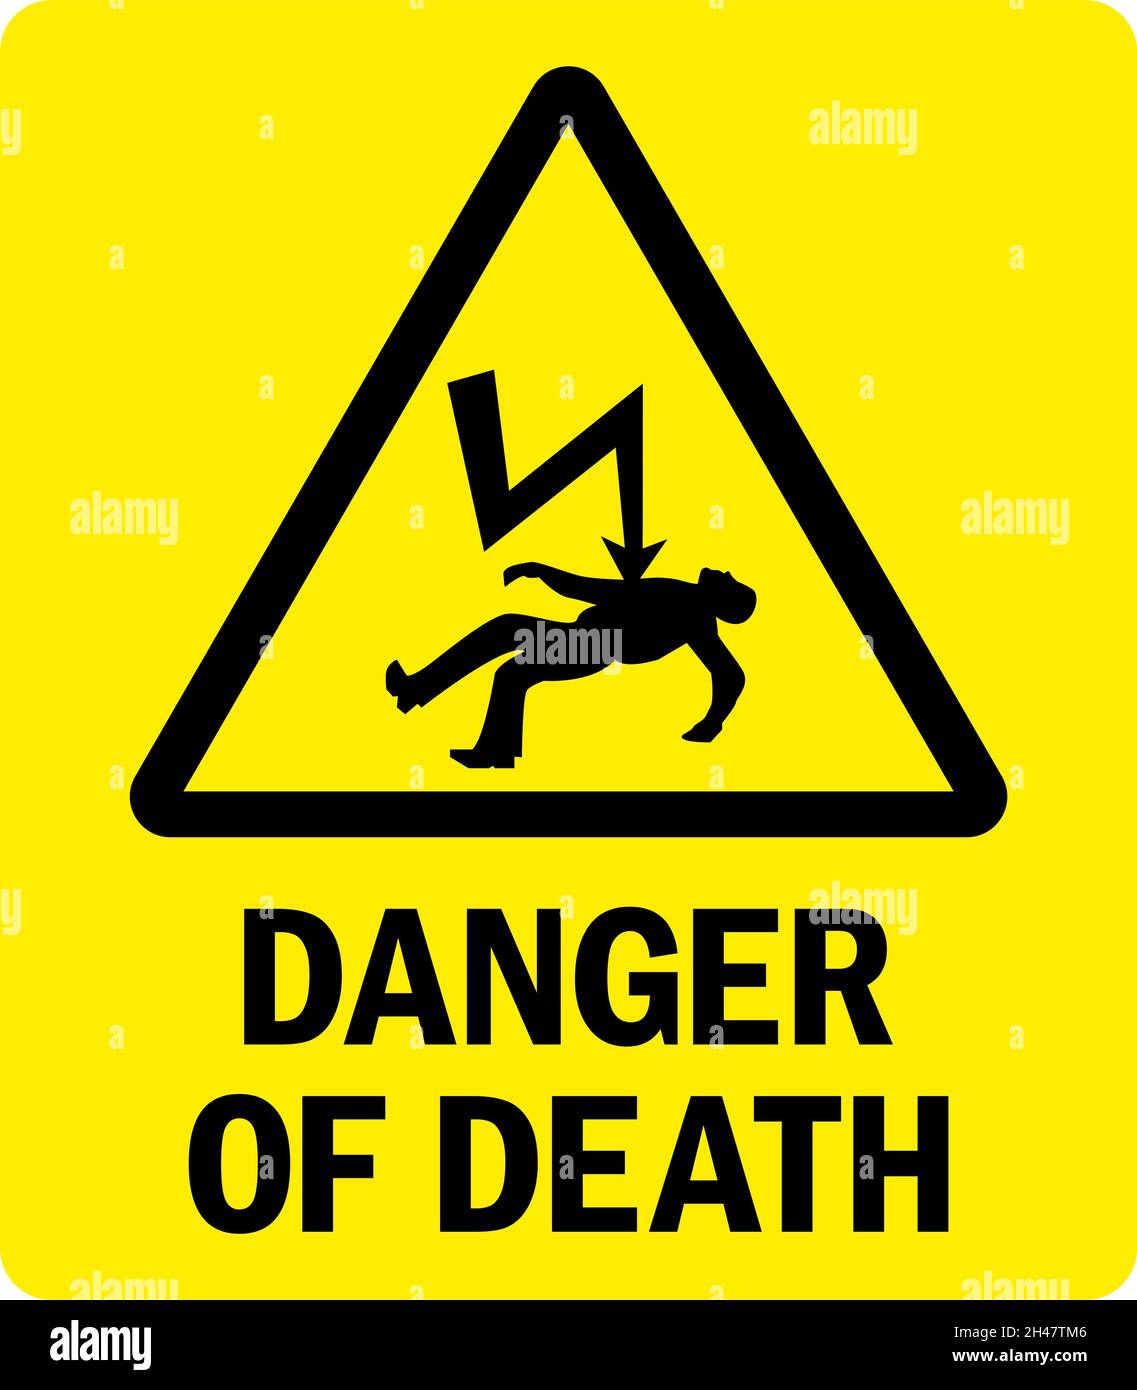 Danger of death electricity warning sign. Yellow background. Safety signs and symbols. Stock Vector